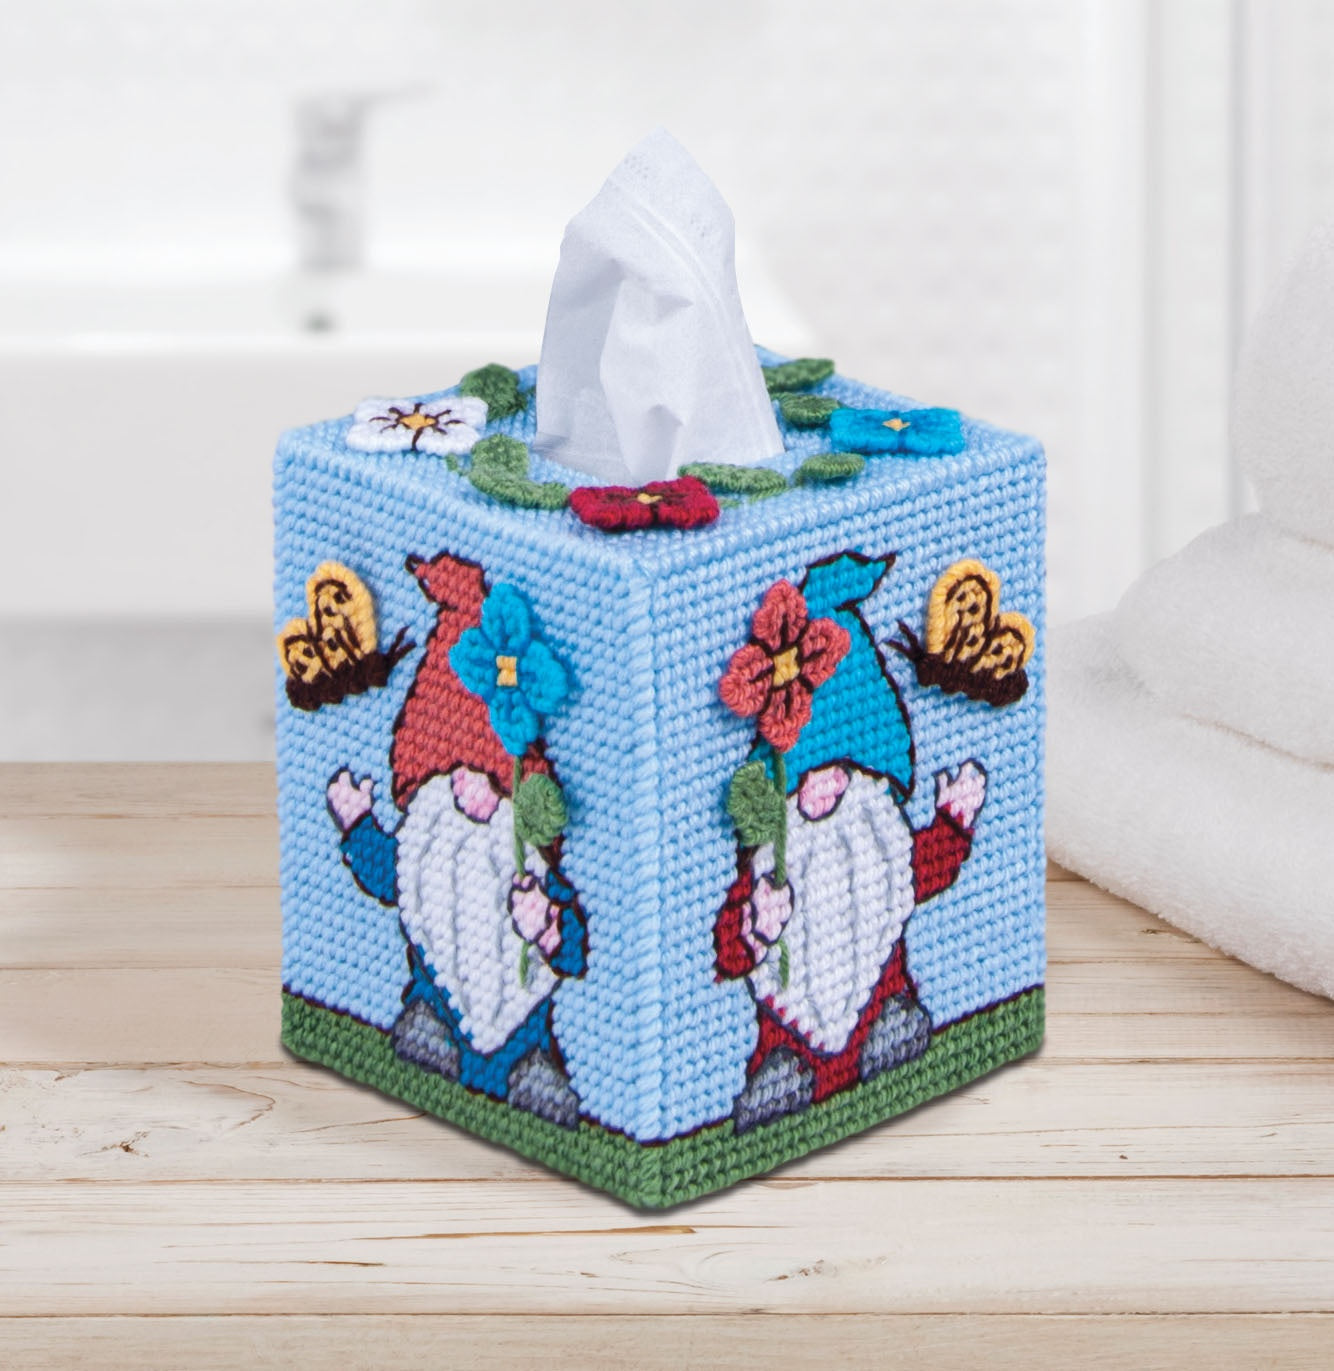 Plastic Canvas Tissue Box Cover Kit. This Design features colorful gnomes with butterflies and flowers.